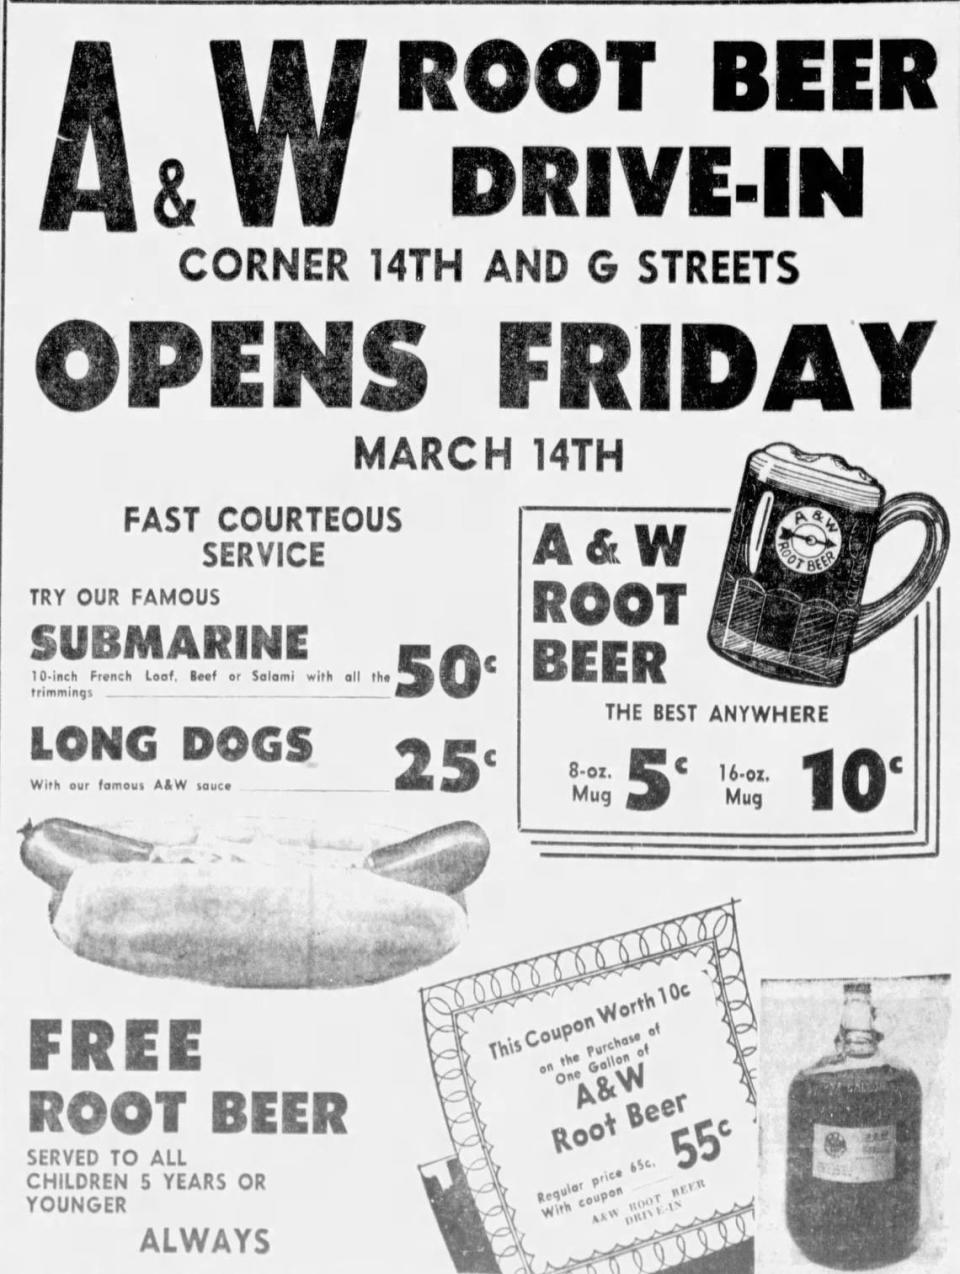 Modesto’s A&W Root Beer Drive-In advertised its grand opening celebration in The Modesto Bee on Friday, March 14, 1958.